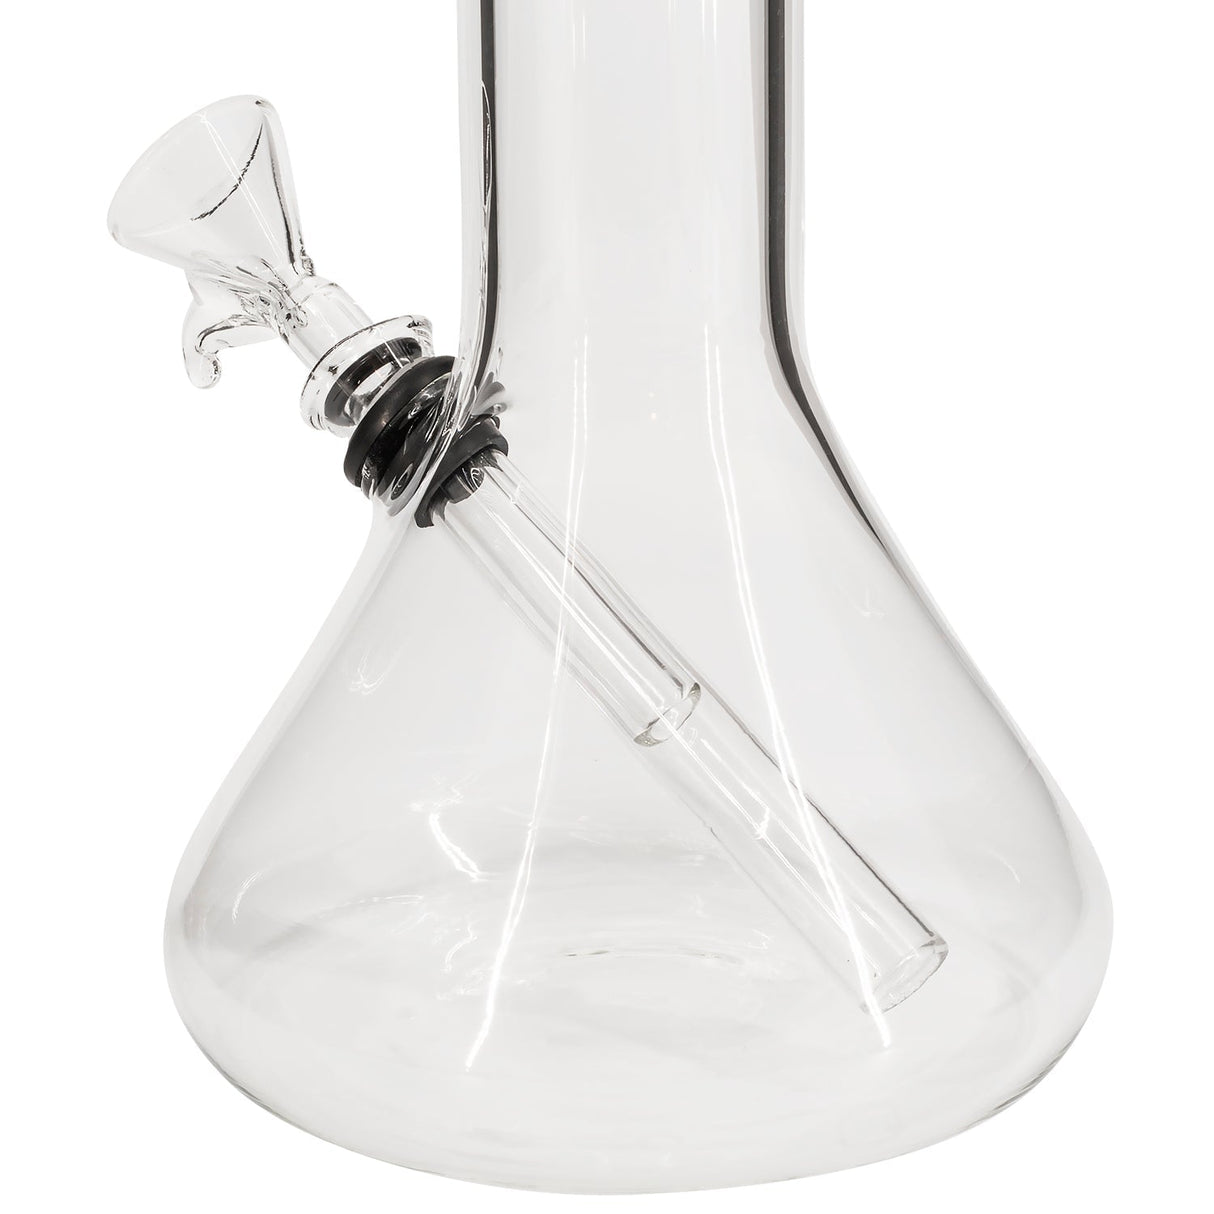 Close-up of LA Pipes Beaker Base Bong with thick borosilicate glass and 45-degree grommet joint